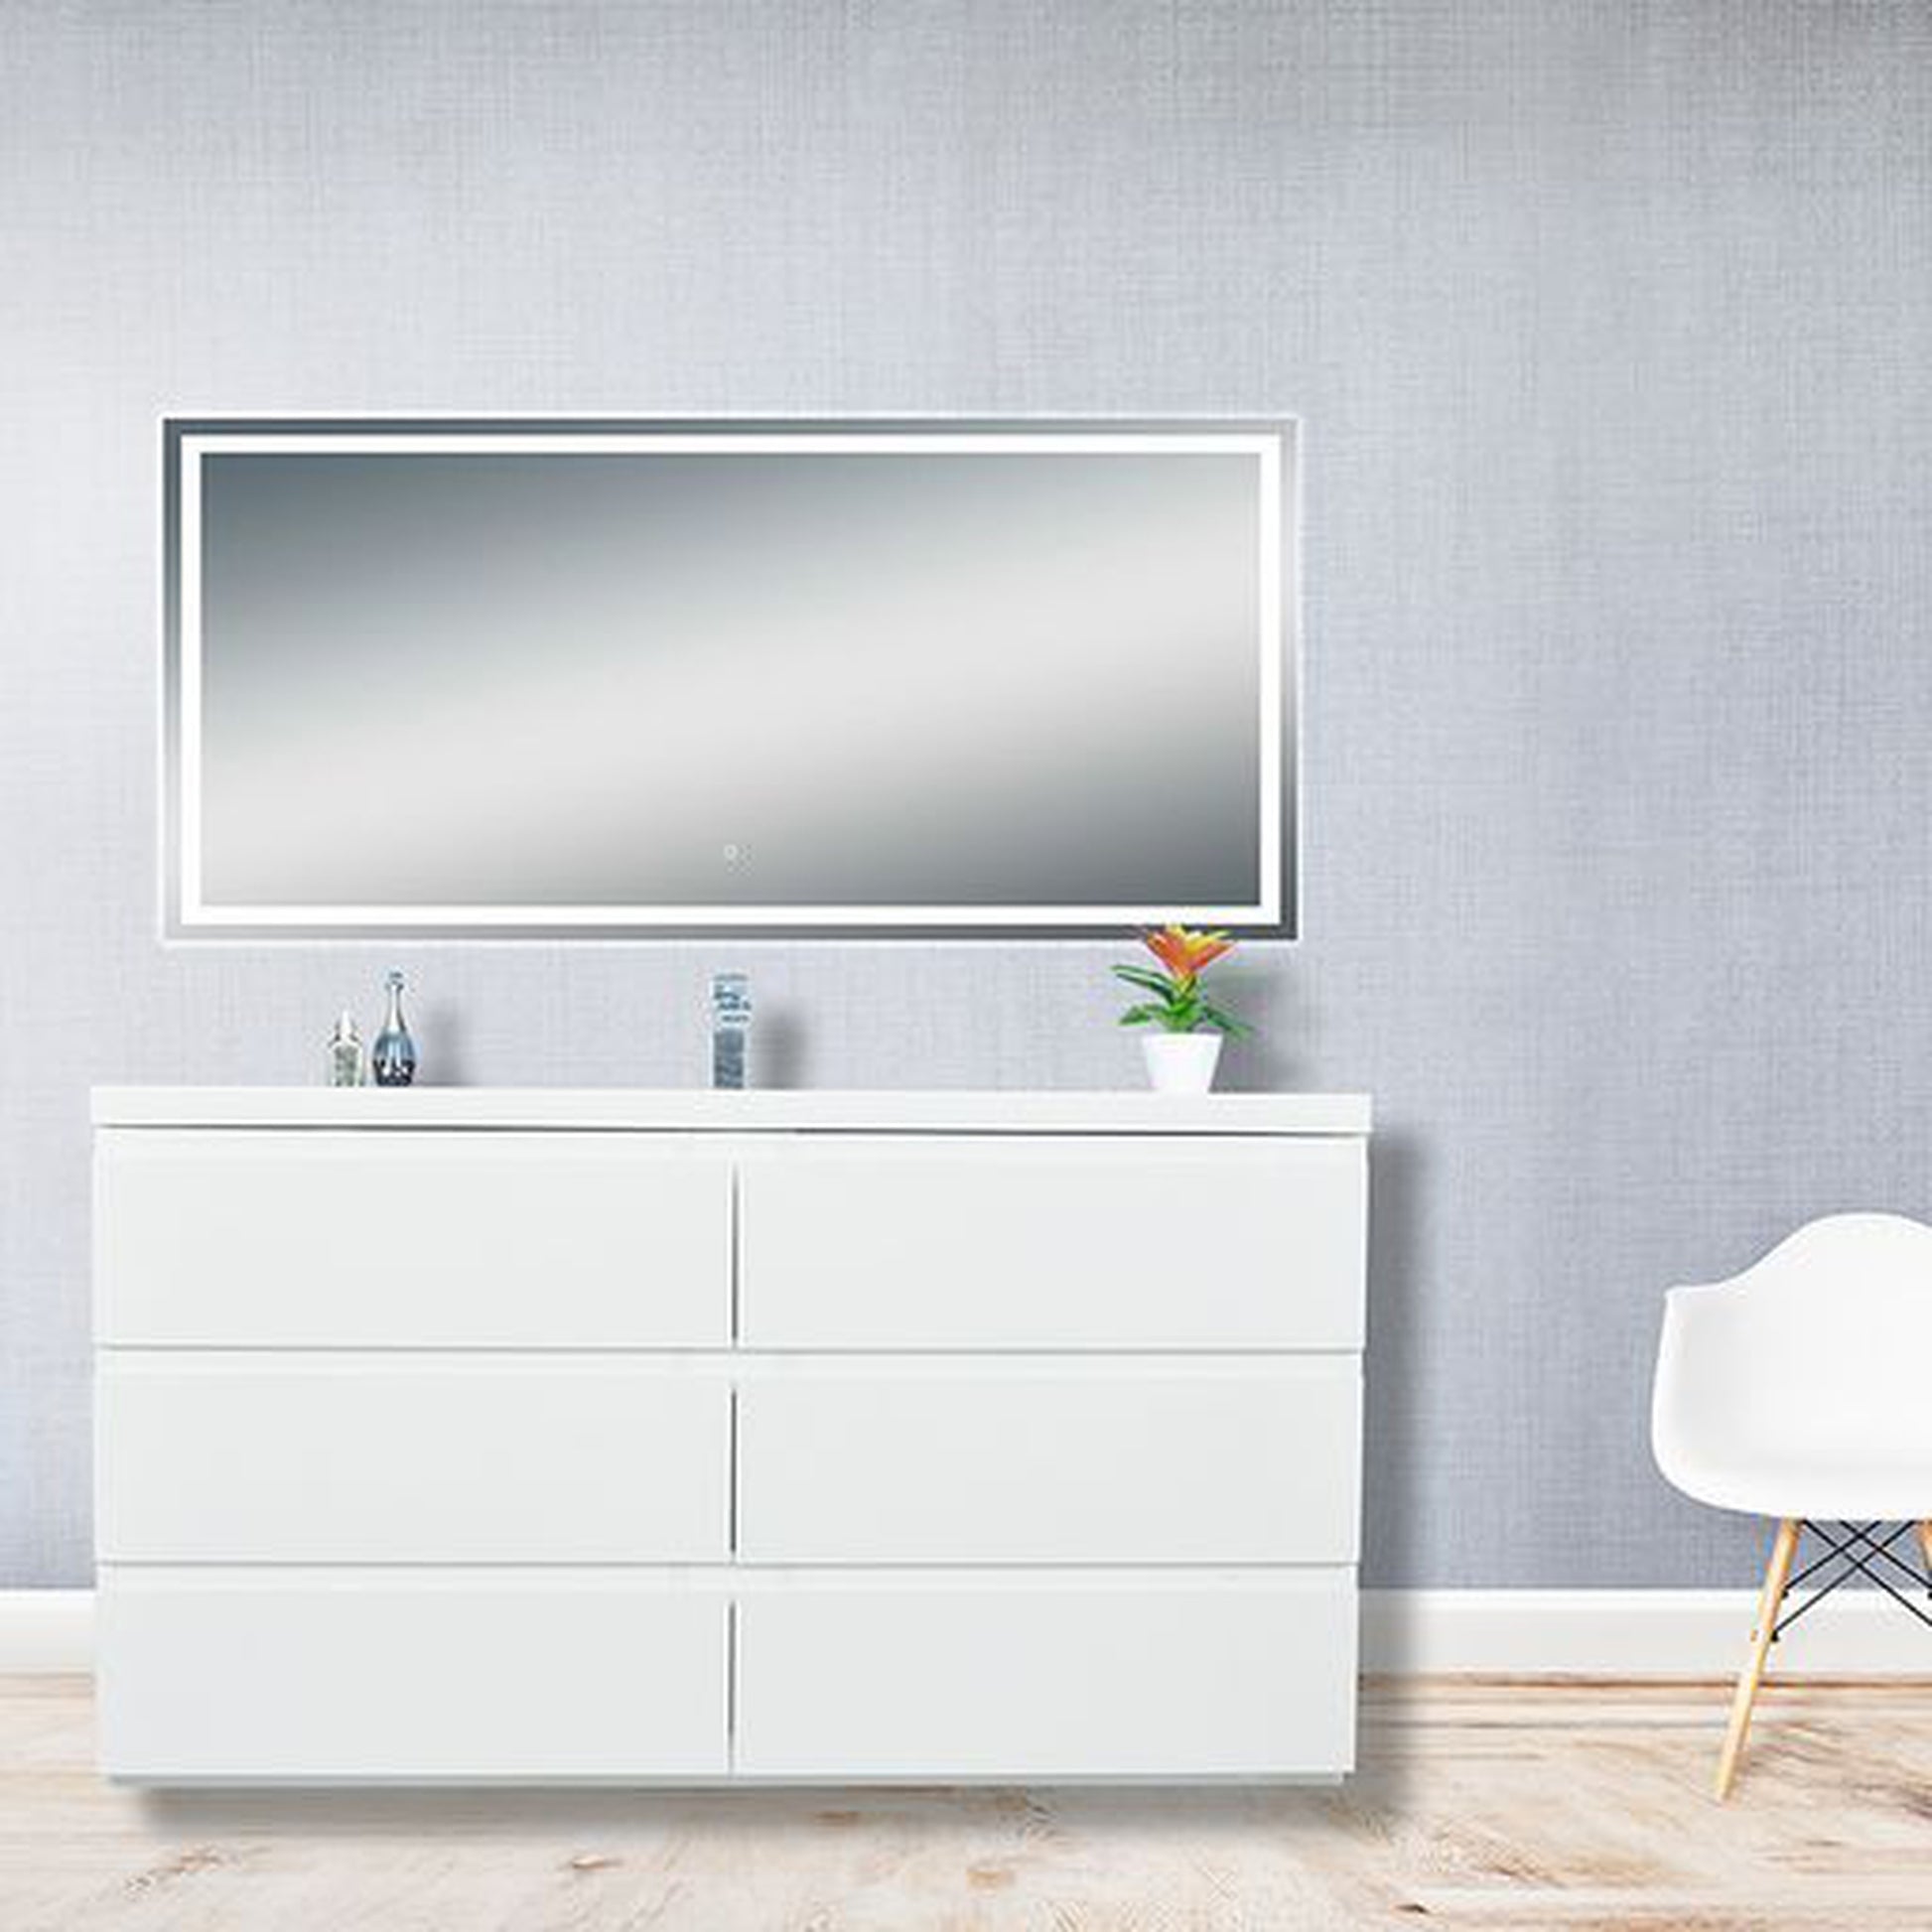 Moreno Bath Angeles 60" High Gloss White Freestanding Vanity With Single Reinforced White Acrylic Sink